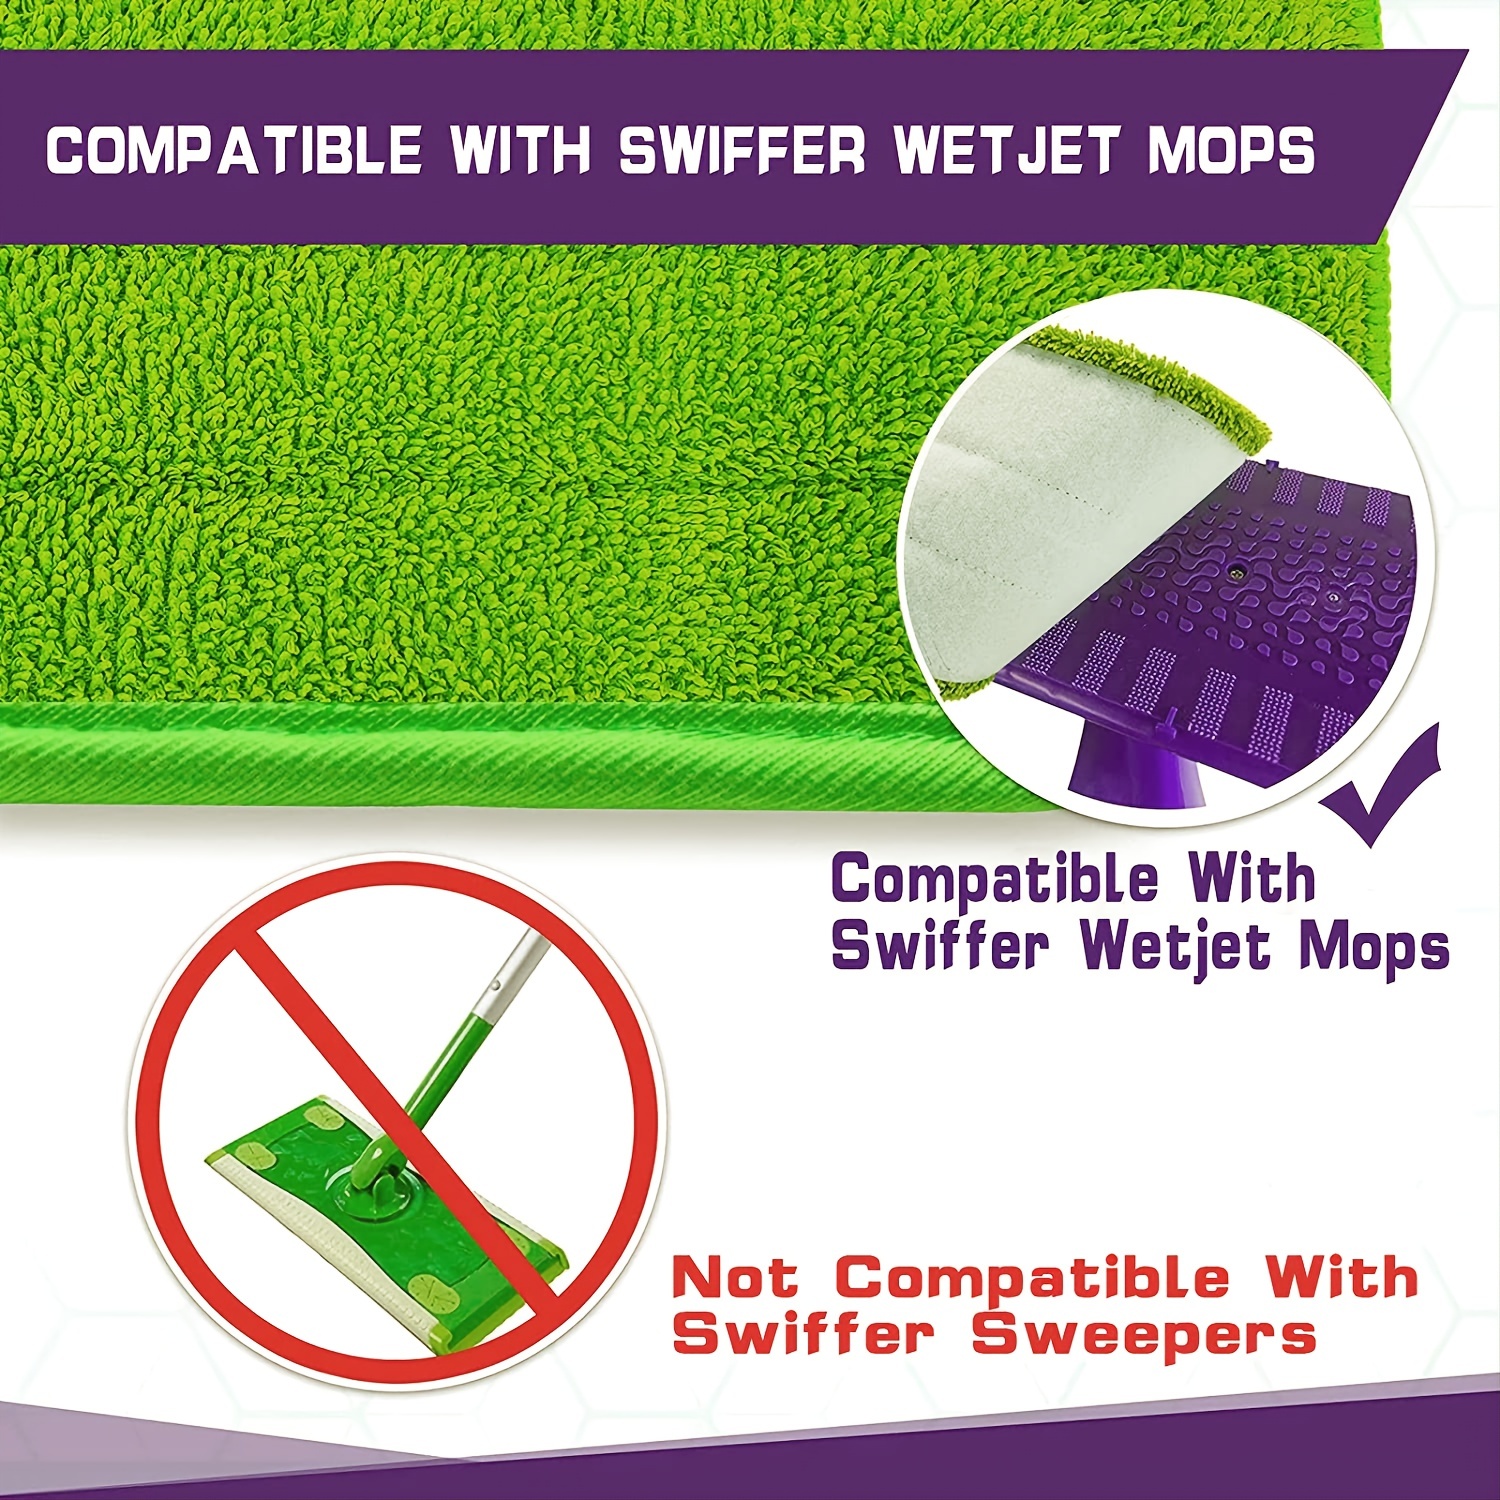 5 Pack Reusable Washable Mop Pads For Swiffer Wet Jet, Green Part